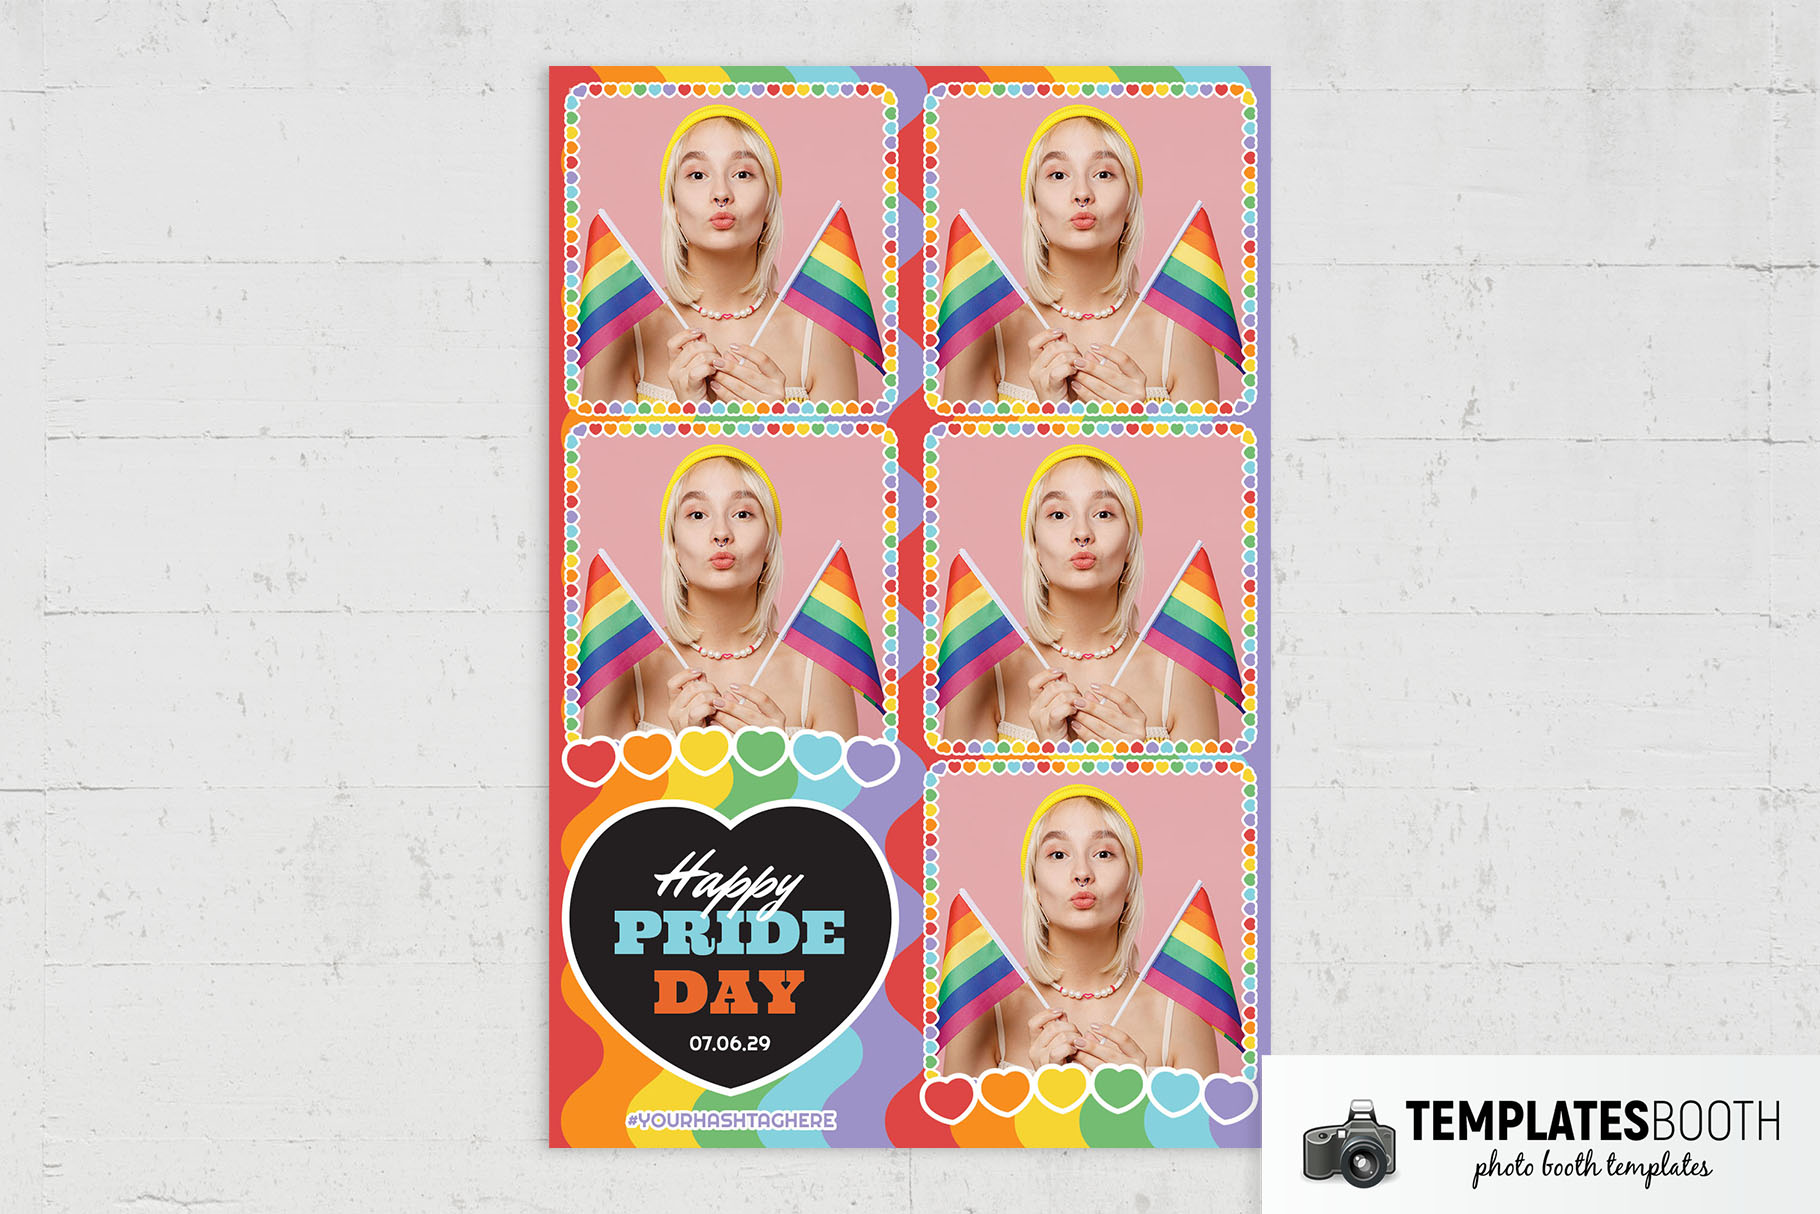 Colourful LGBT Pride Photo Booth Template